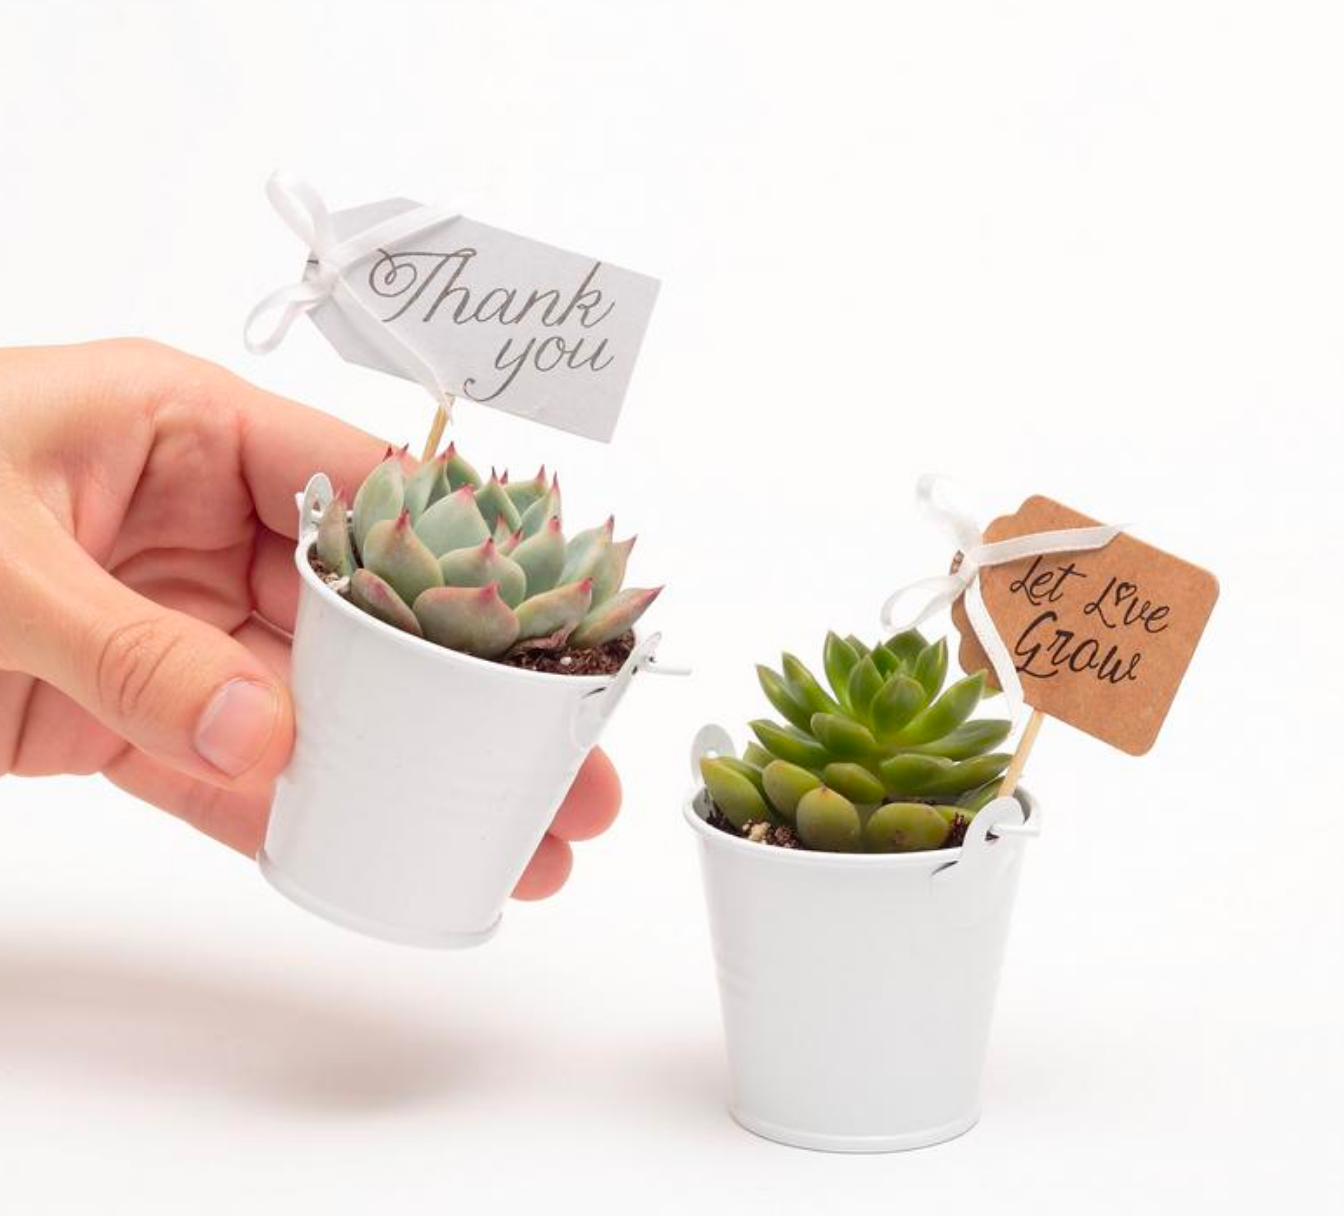 Wedding Event Rosette Succulents Plant with White Metal Pails and Let Love Grow Tags